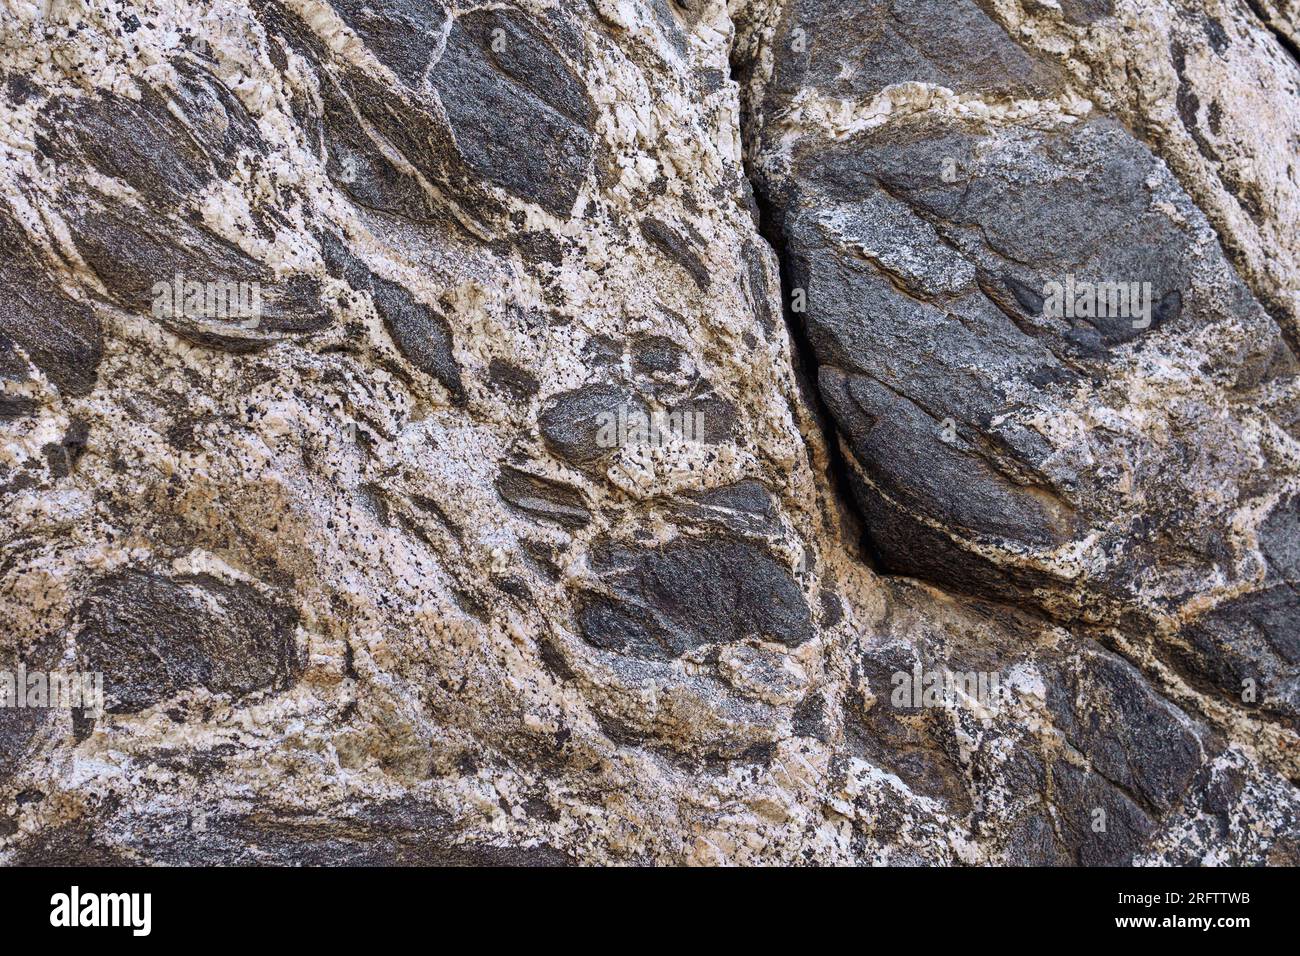 Metamorphic Gneiss rock background with texture and black and white layers. Quartz diorite to quartz monzonite gneiss. Stock Photo